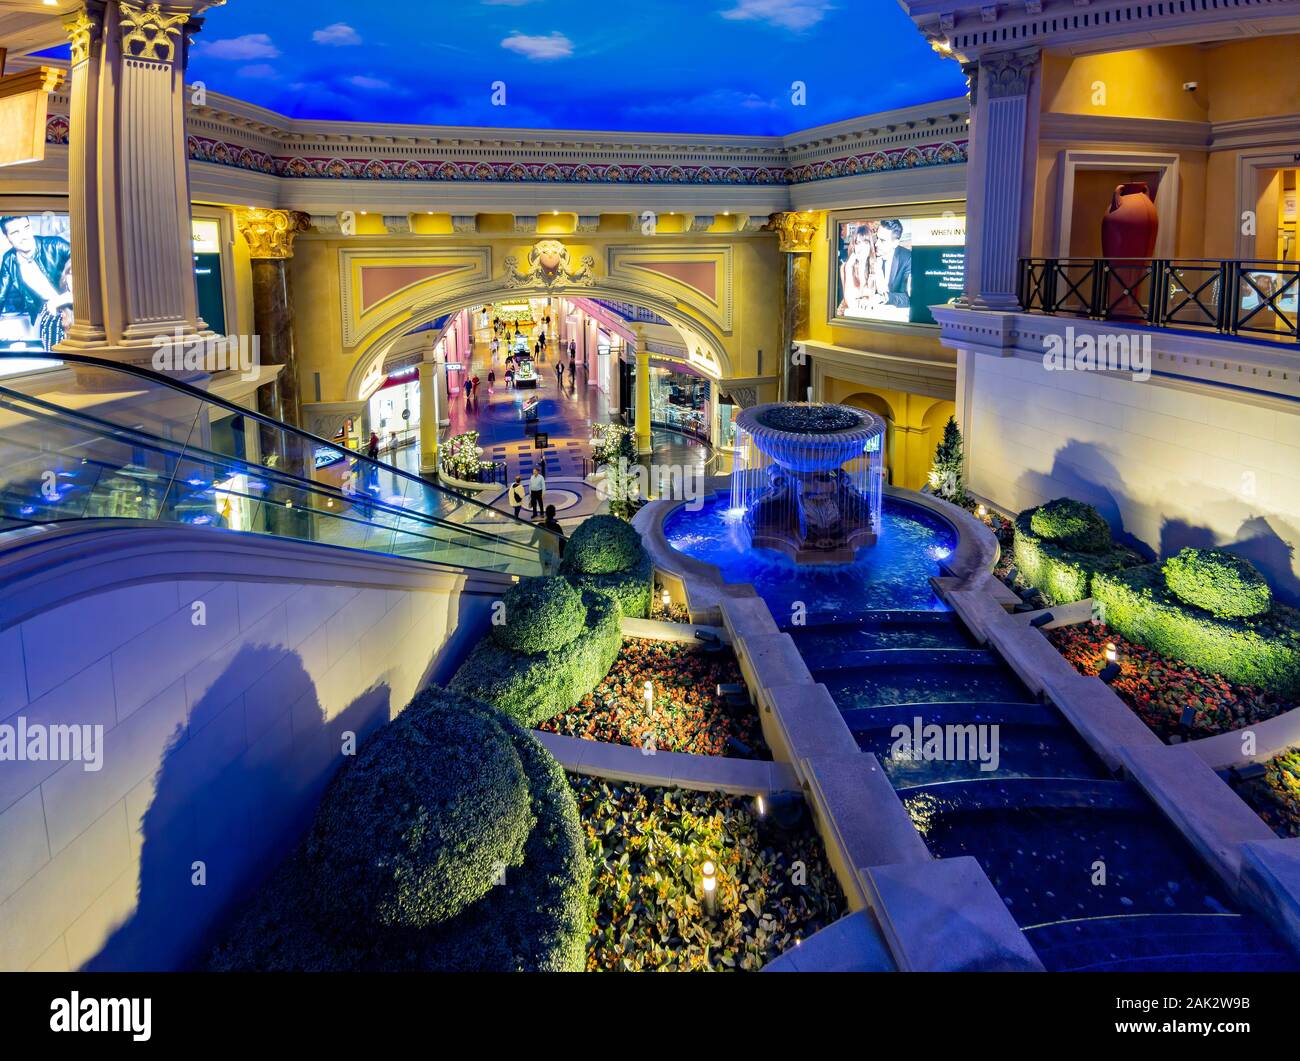 Forum Shops opened in Las Vegas 25 years ago today — PHOTOS